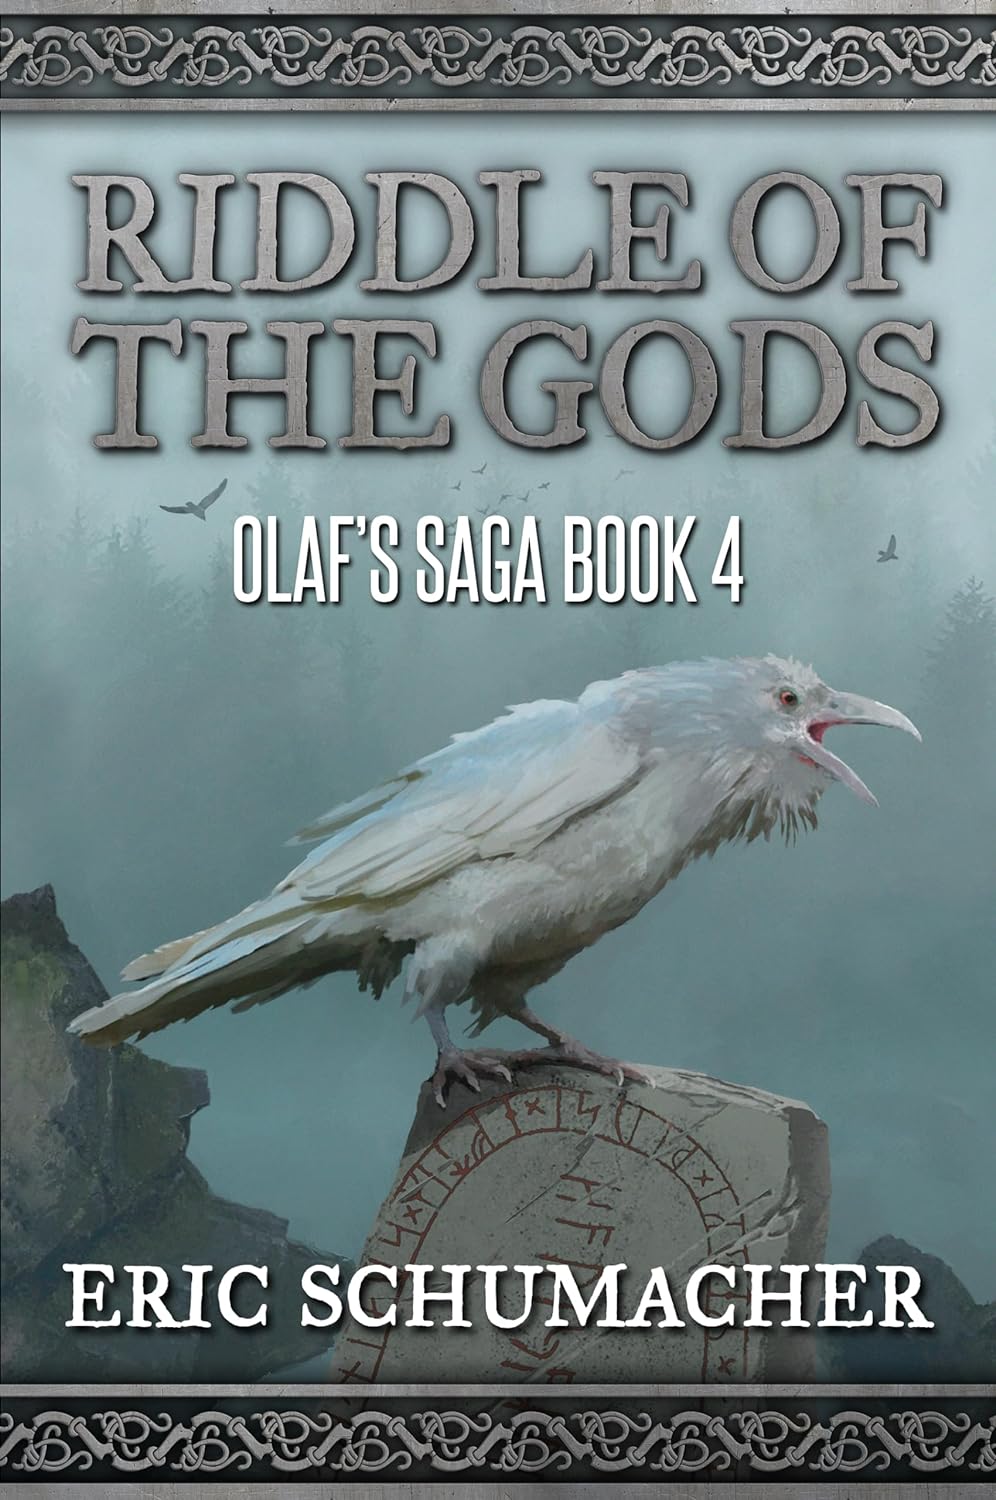 It’s release day for Eric Schumacher’s new book in Olaf’s Saga, Riddle of the Gods #bookreview #newrelease #historicalfiction